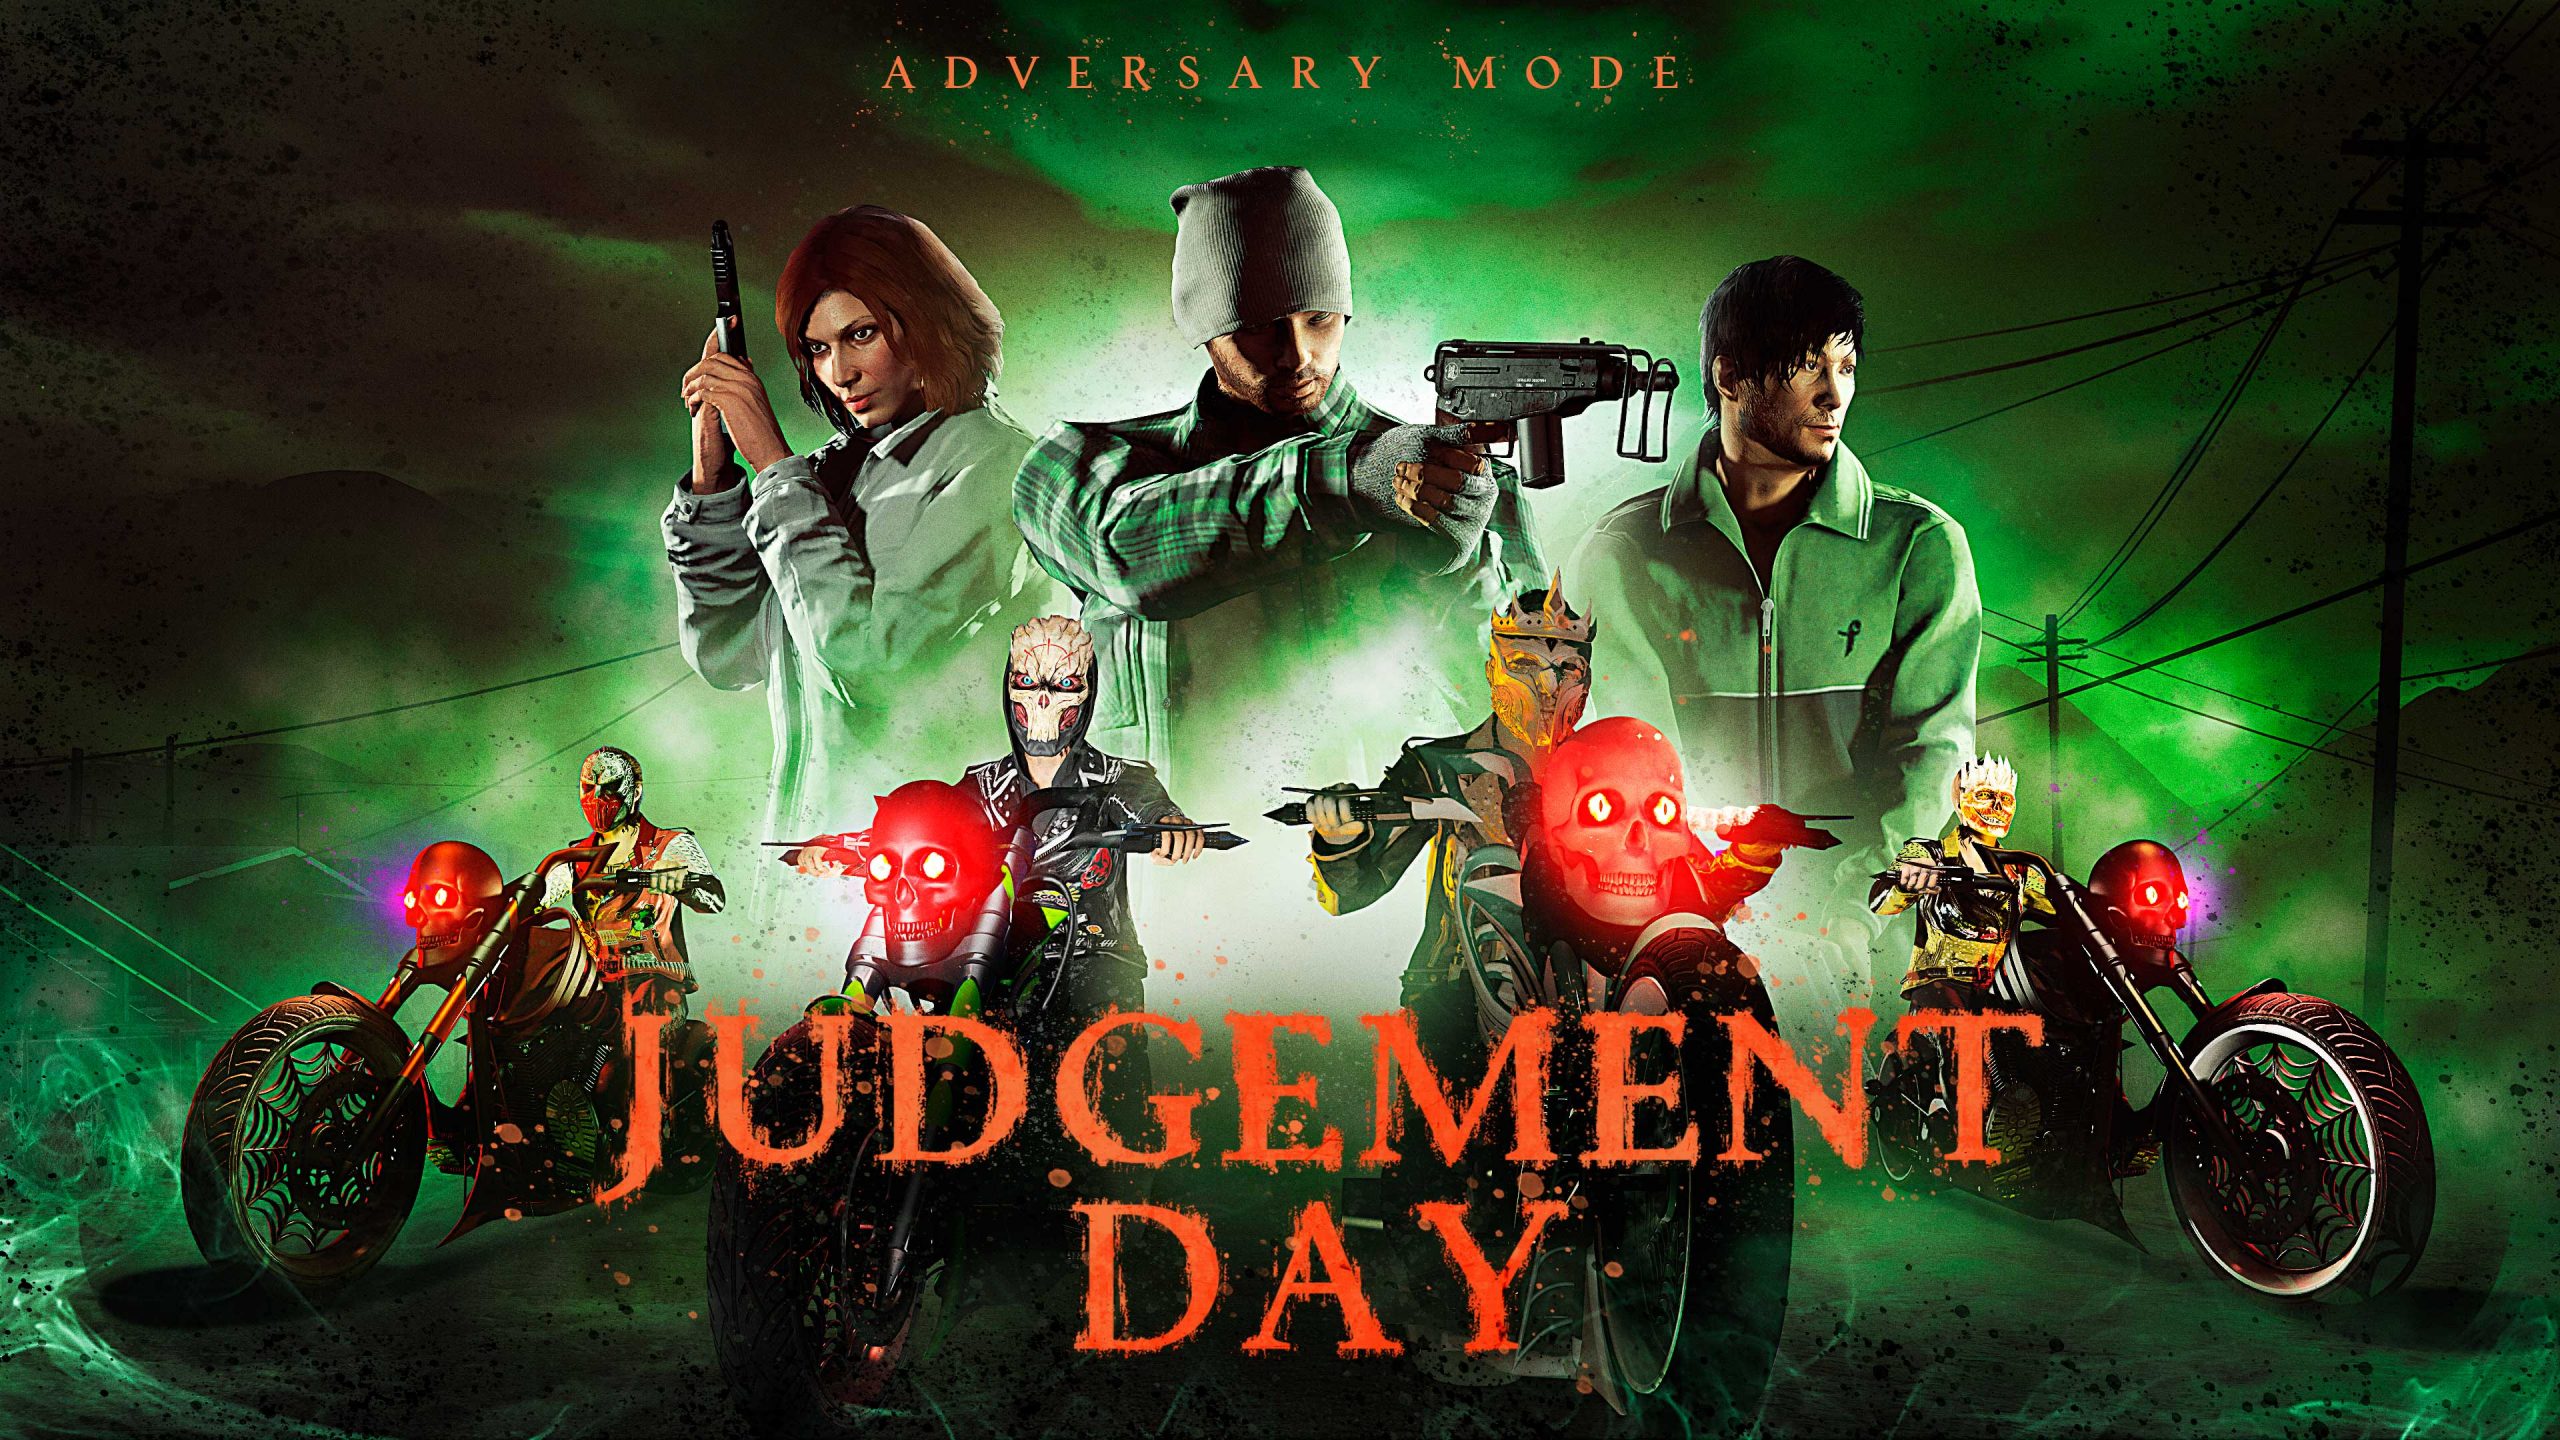 gta online image for judgement day mode